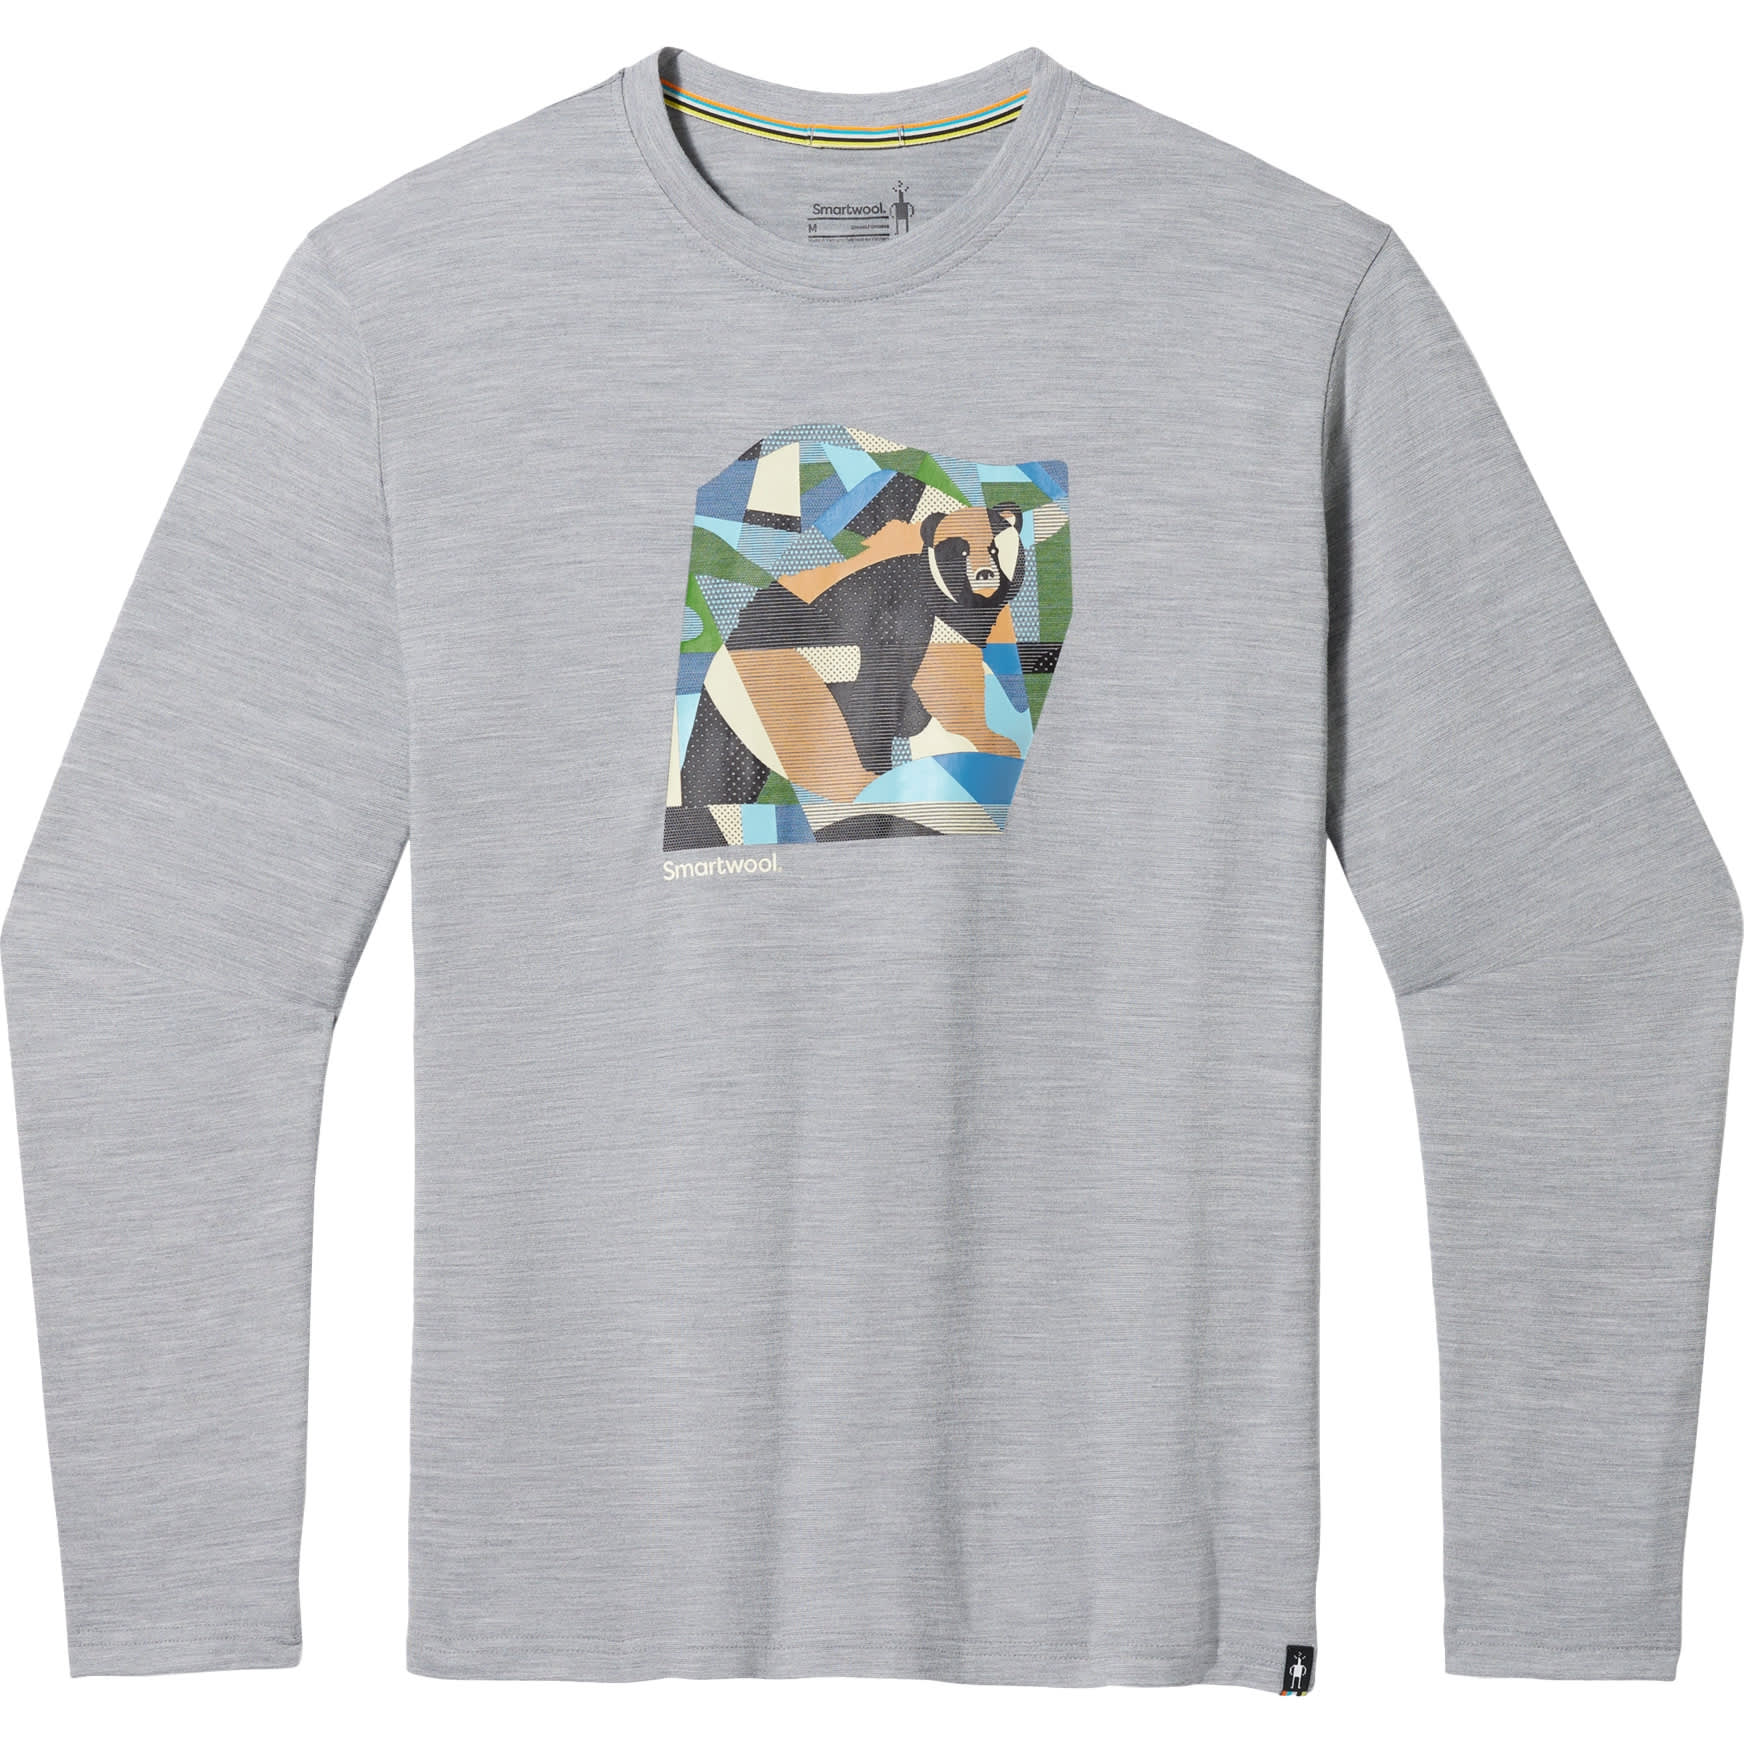 Smartwool® Men’s Bear Country Graphic Long-Sleeve T-Shirt